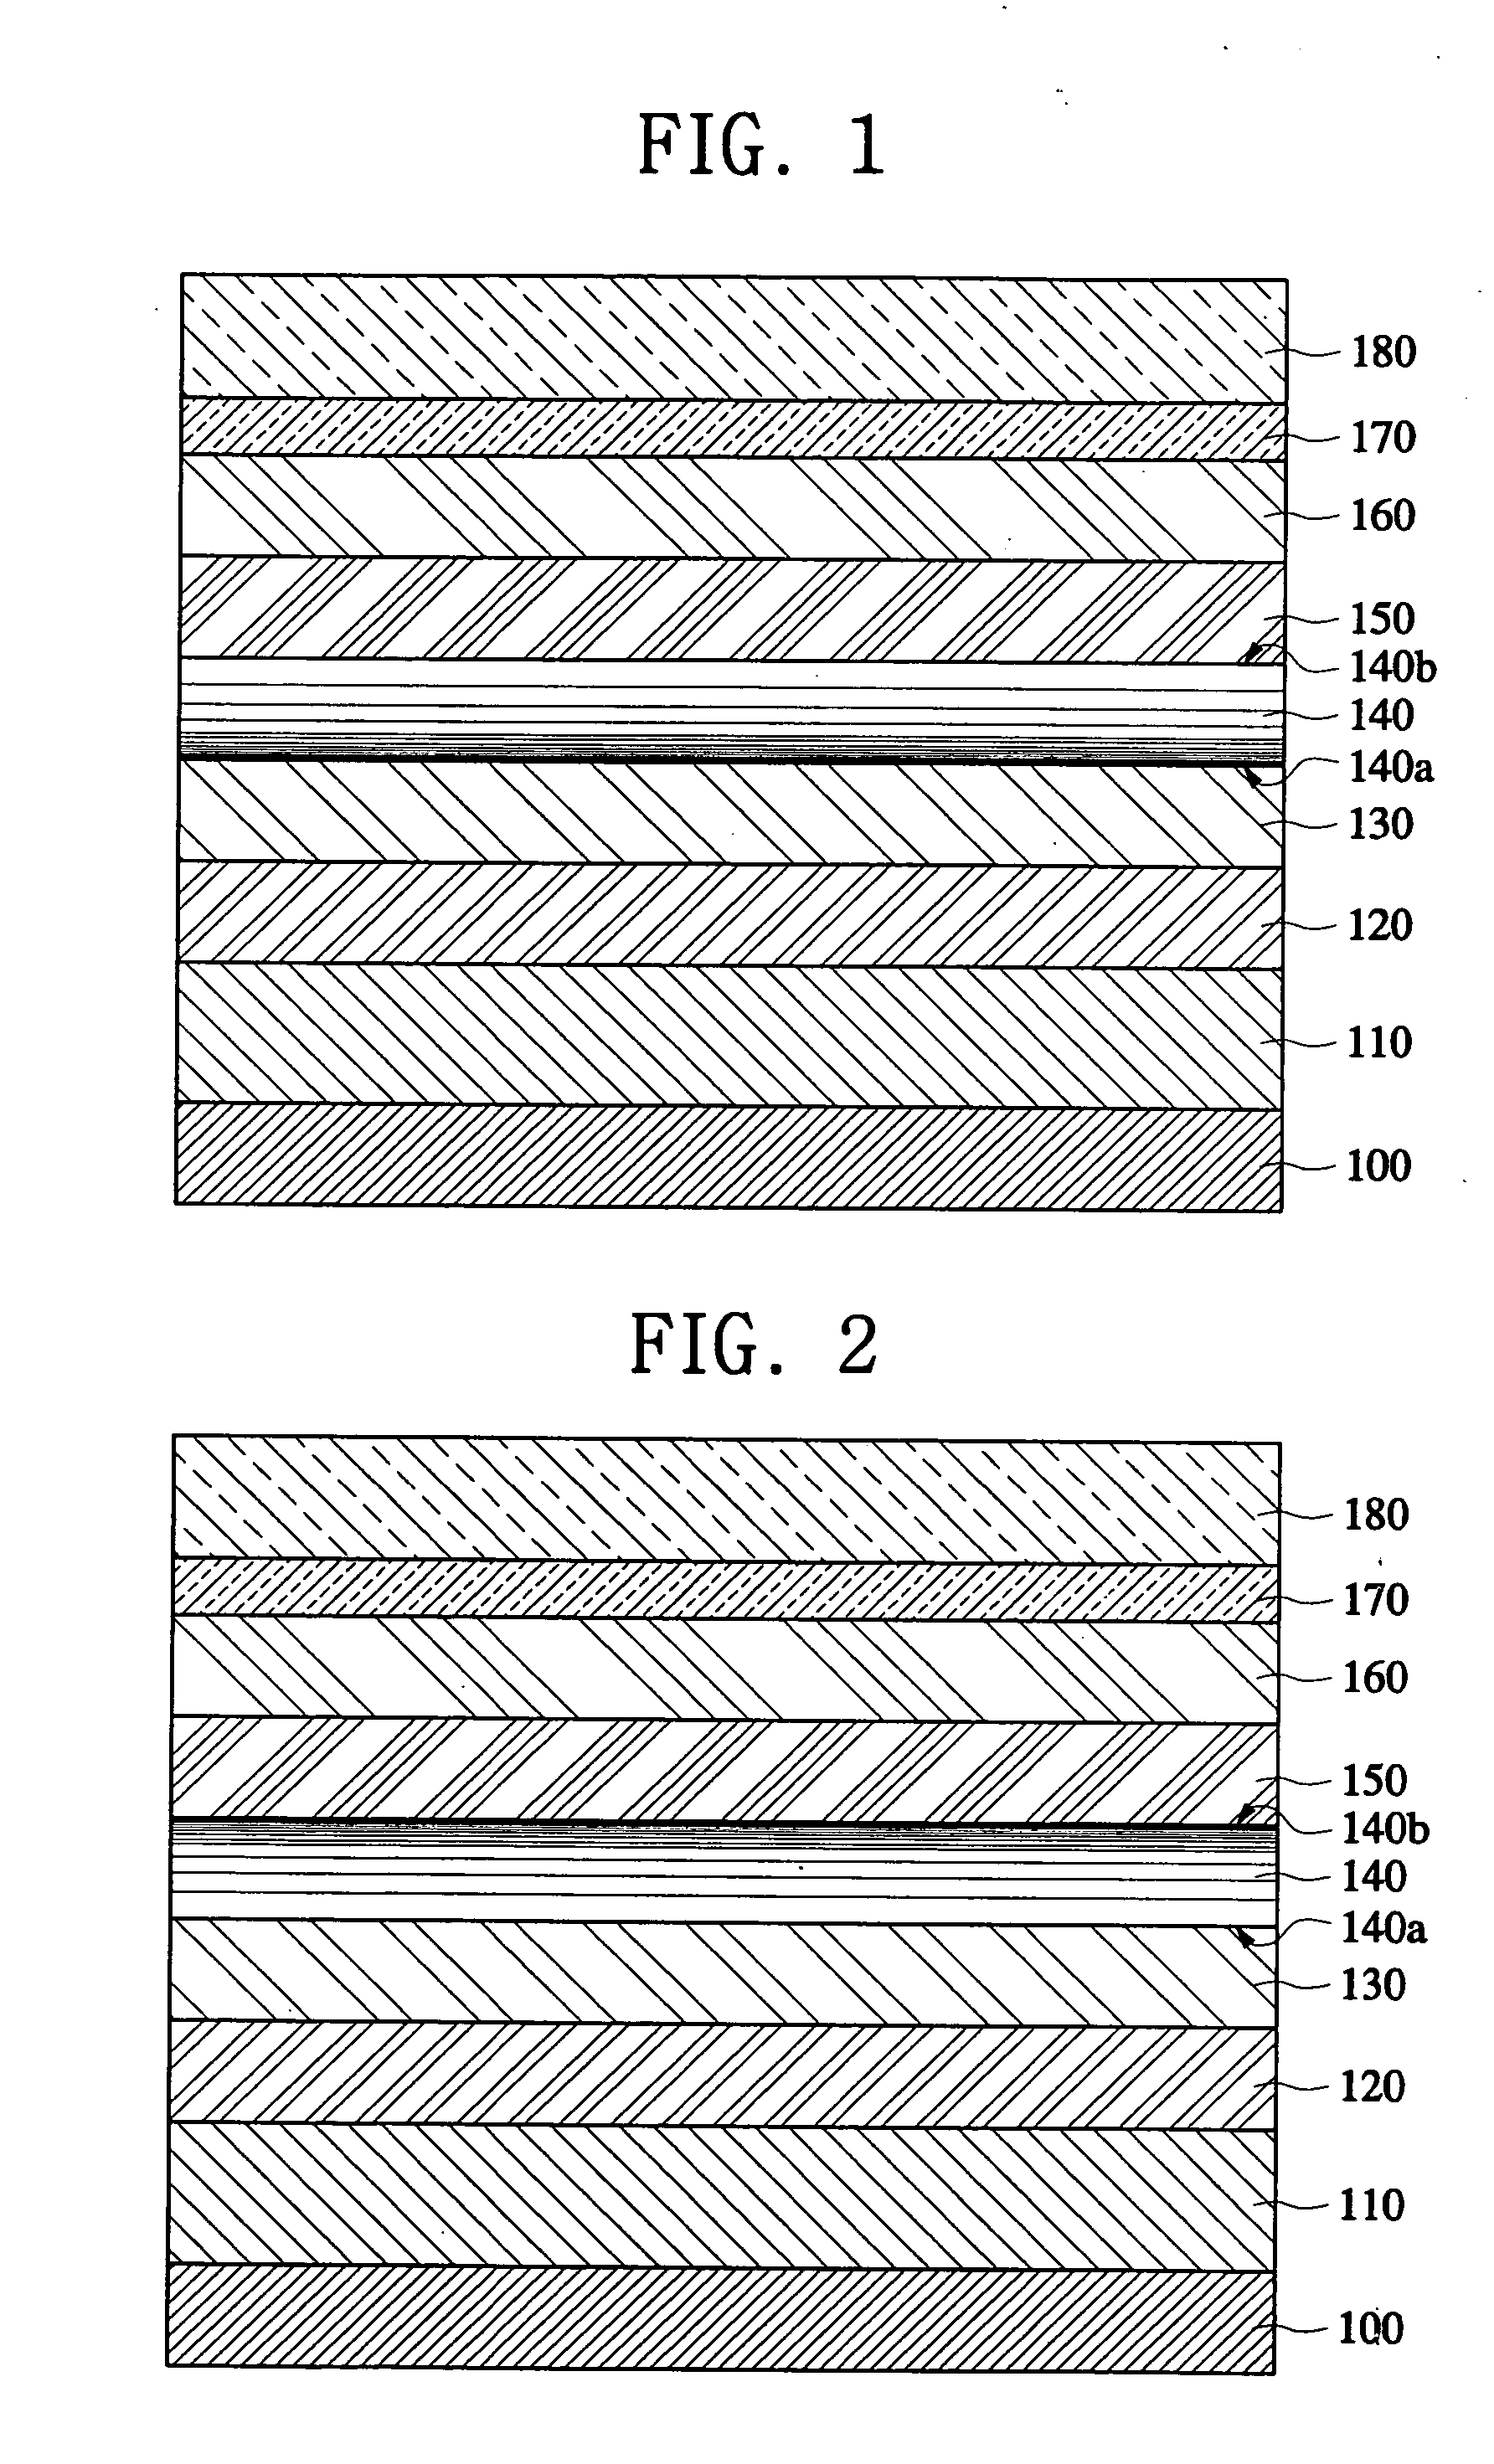 Organic lights-emitting device with doped emission layer